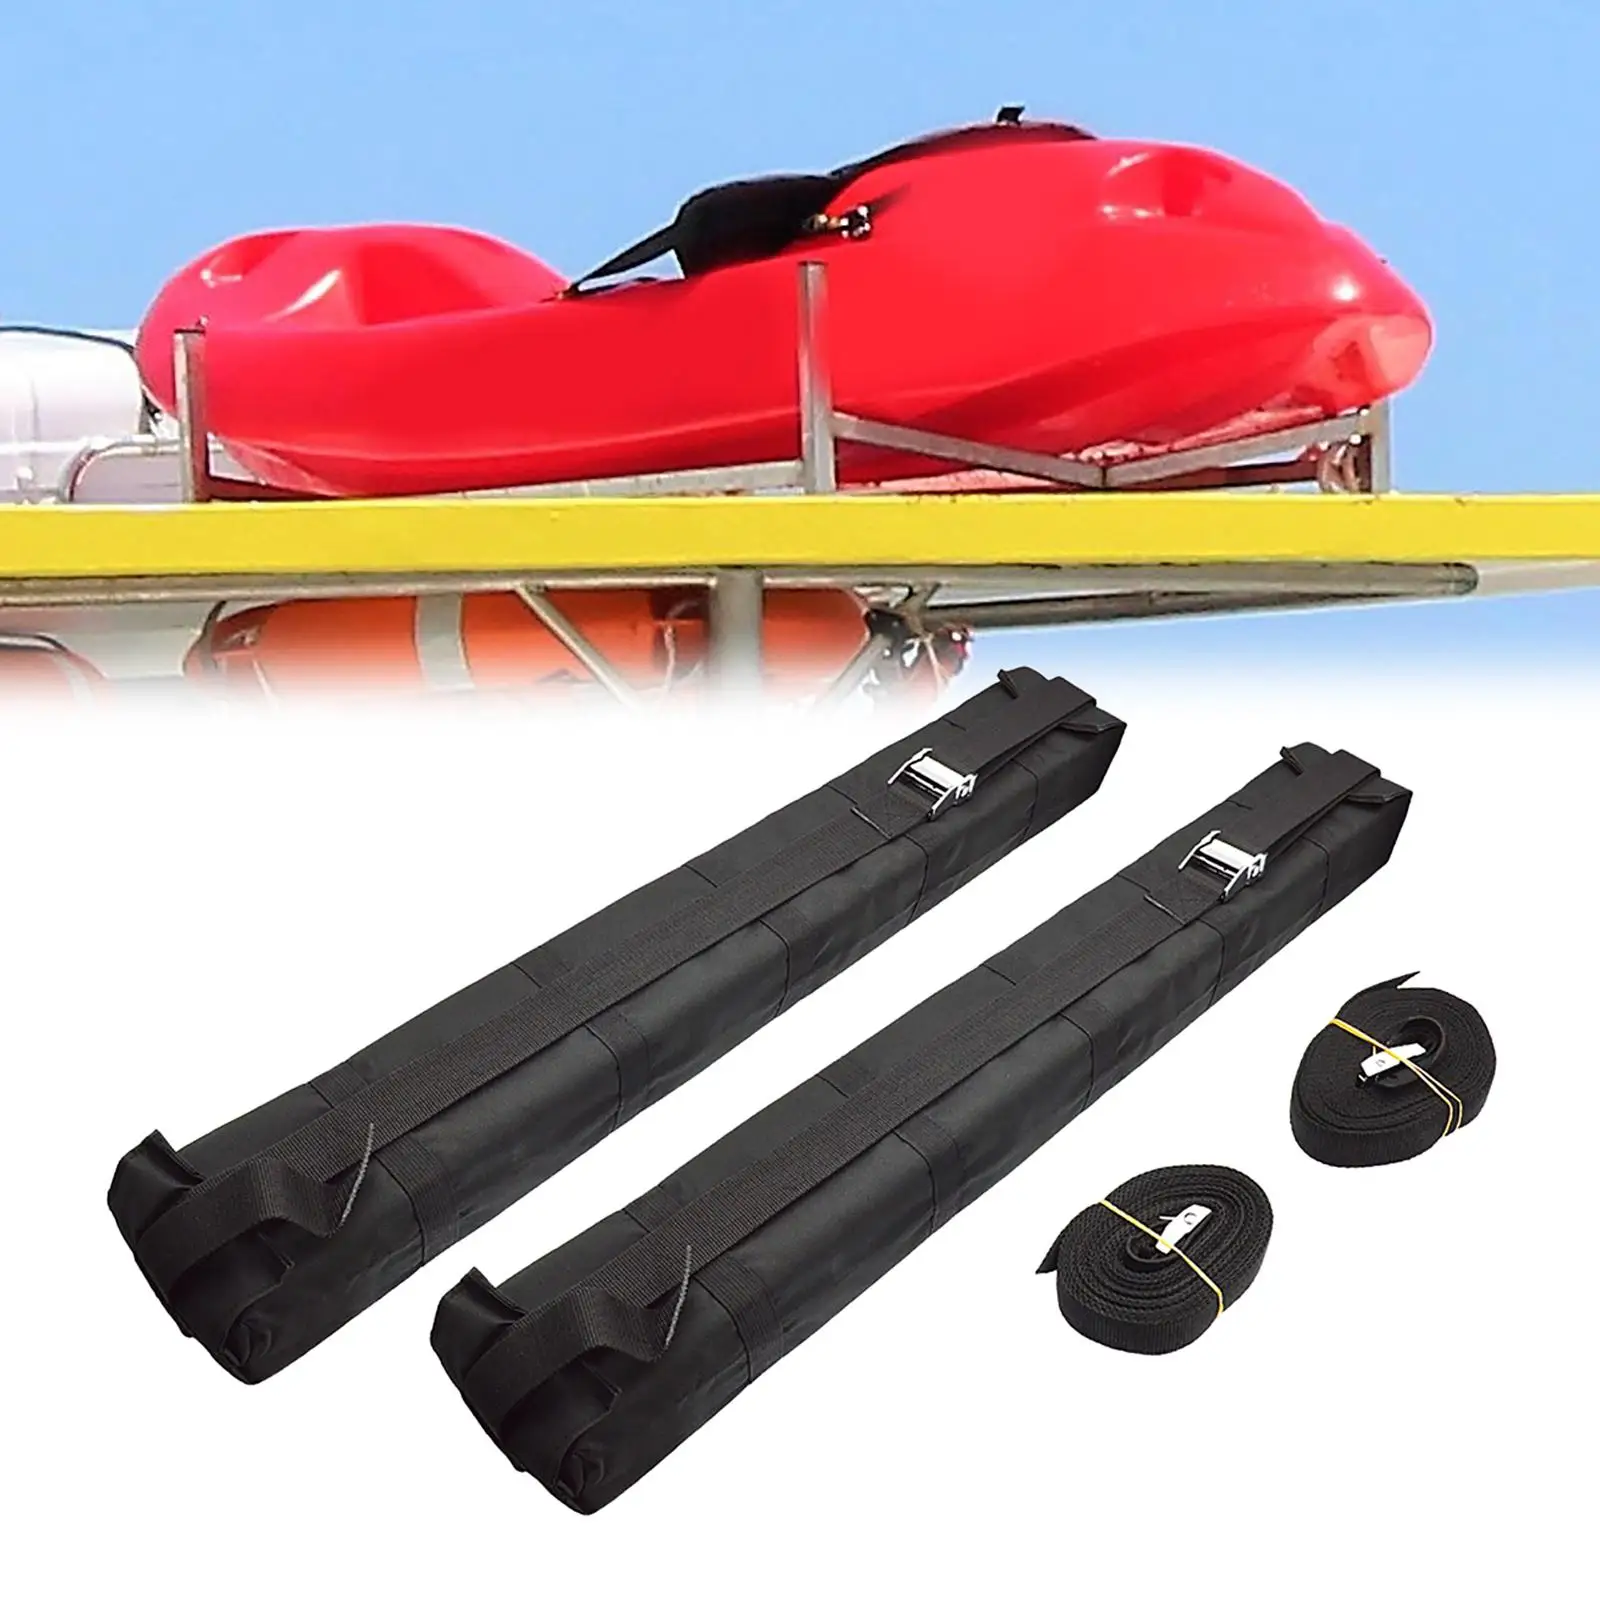 Roof Rack Pads for Kayak Canoe Paddleboard Snowboard Water Sports Windsurfing Universal Surfboard Rack Accessories